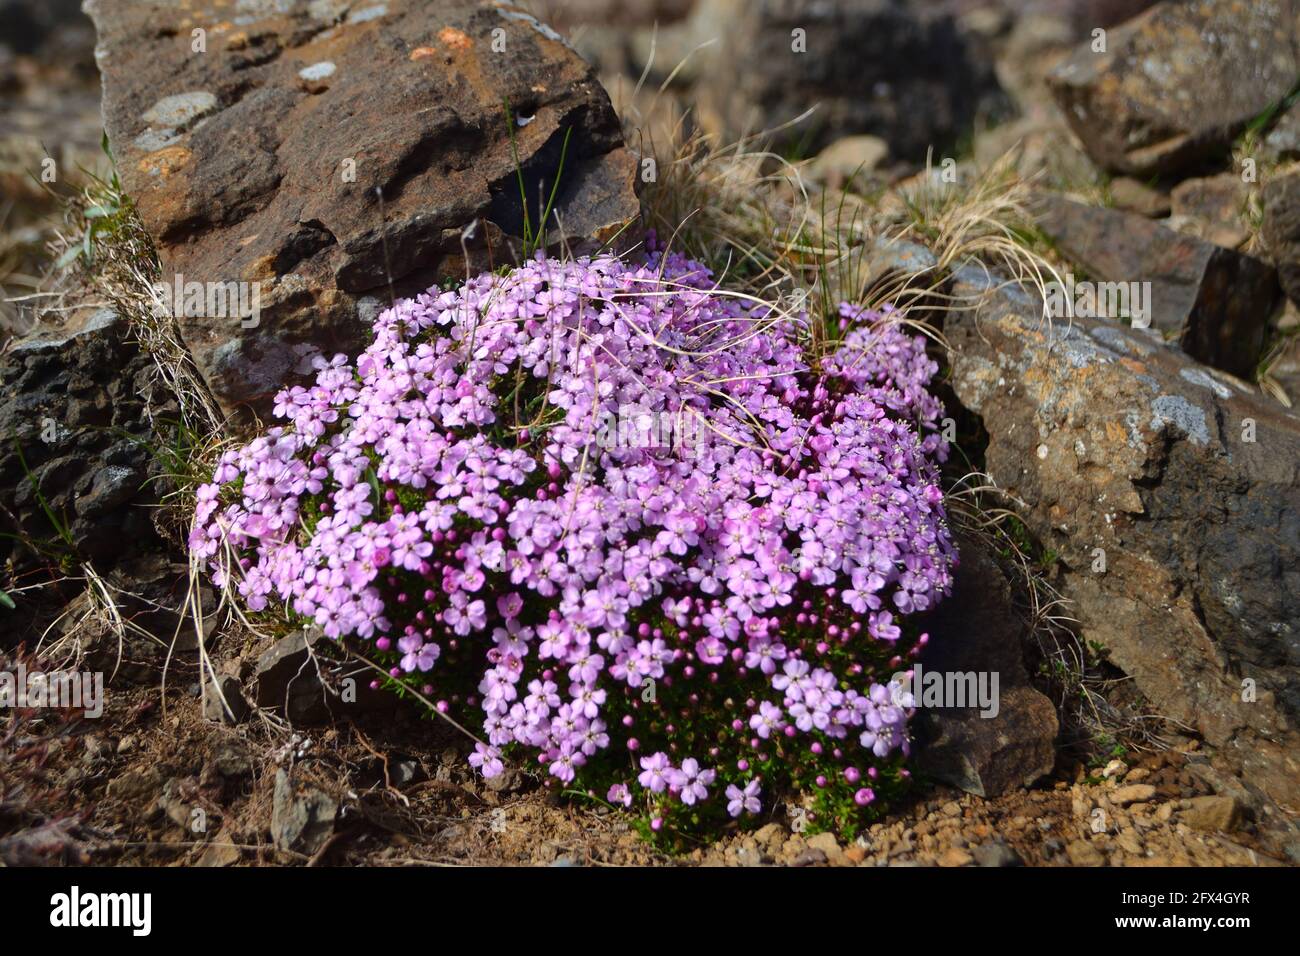 A clump of rock soapwort with pink flowers growing among rocks in a natural coastal habitat in the British Isles Stock Photo